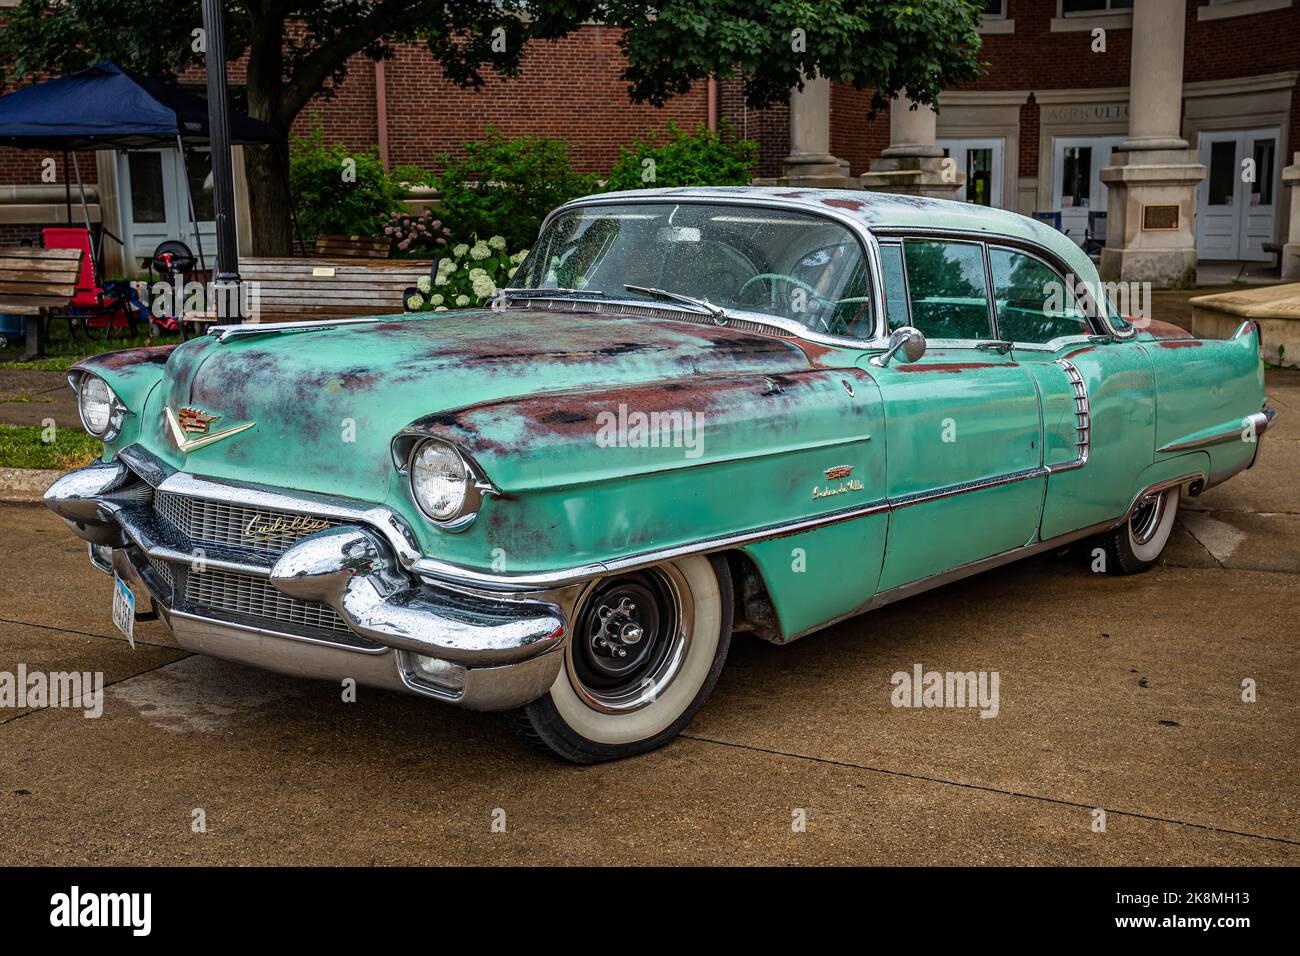 Des Moines, IA - July 01, 2022: High perspective front corner view of a 1956 Cadillac 62 Sedan DeVille at a local car show. Stock Photo